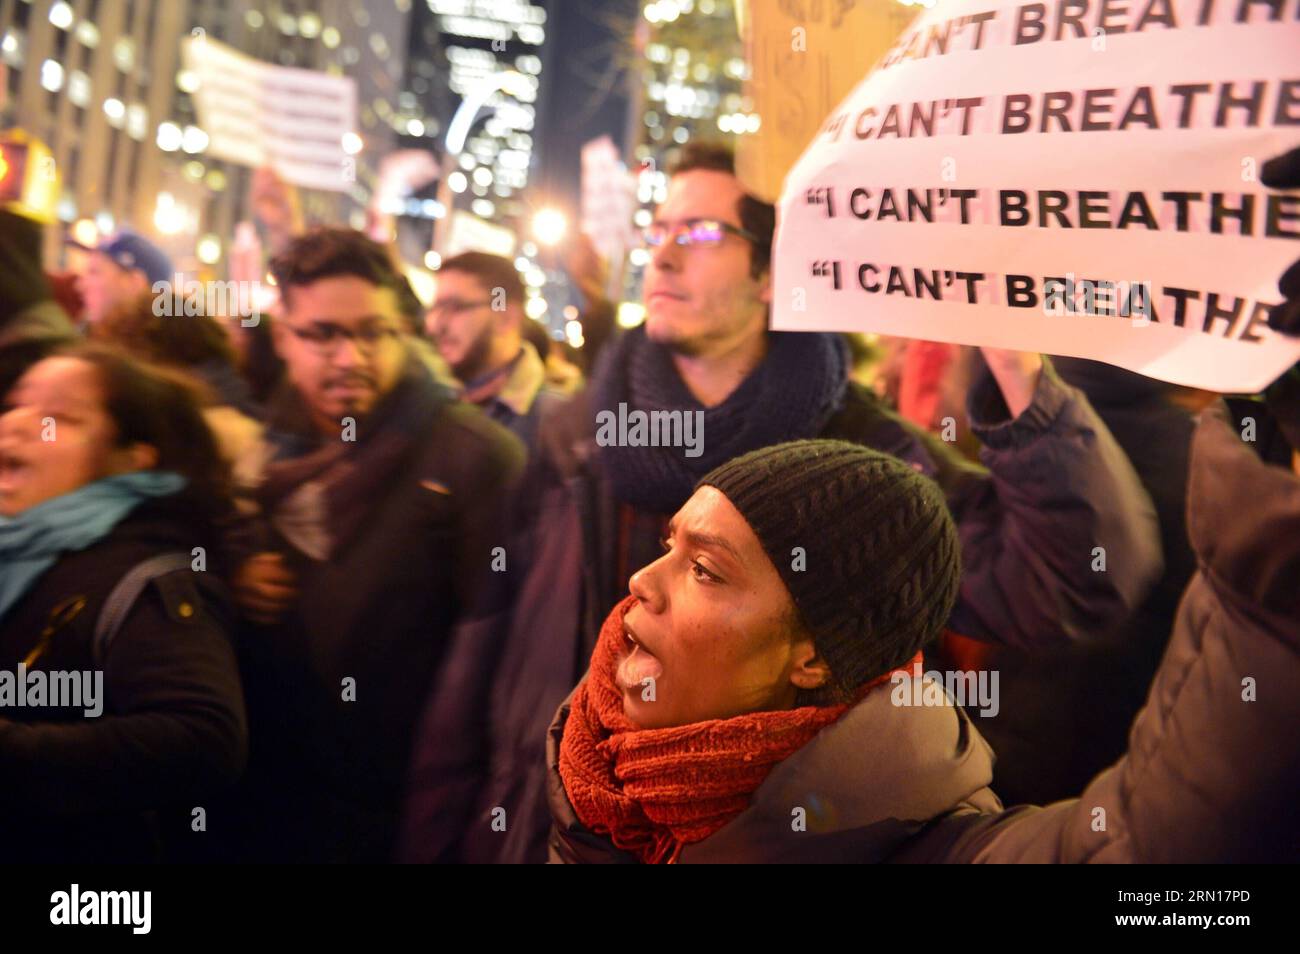 NEW YORK, Dec. 3, 2014 -- Protesters rally at midtown Manhattan in New York, the United States, on Dec. 3, 2014, after a grand jury voted not to indict a white police officer in the chokehold death of a black man on Staten Island. Eric Garner, a 43-year-old father of six, died in July 17 after police officers attempted to arrest him for allegedly selling loose, untaxed cigarettes on Staten Island, New York. azp US-NEW YORK-MIDTOWN MANHATTAN-PROTEST wangxlei PUBLICATIONxNOTxINxCHN Stock Photo